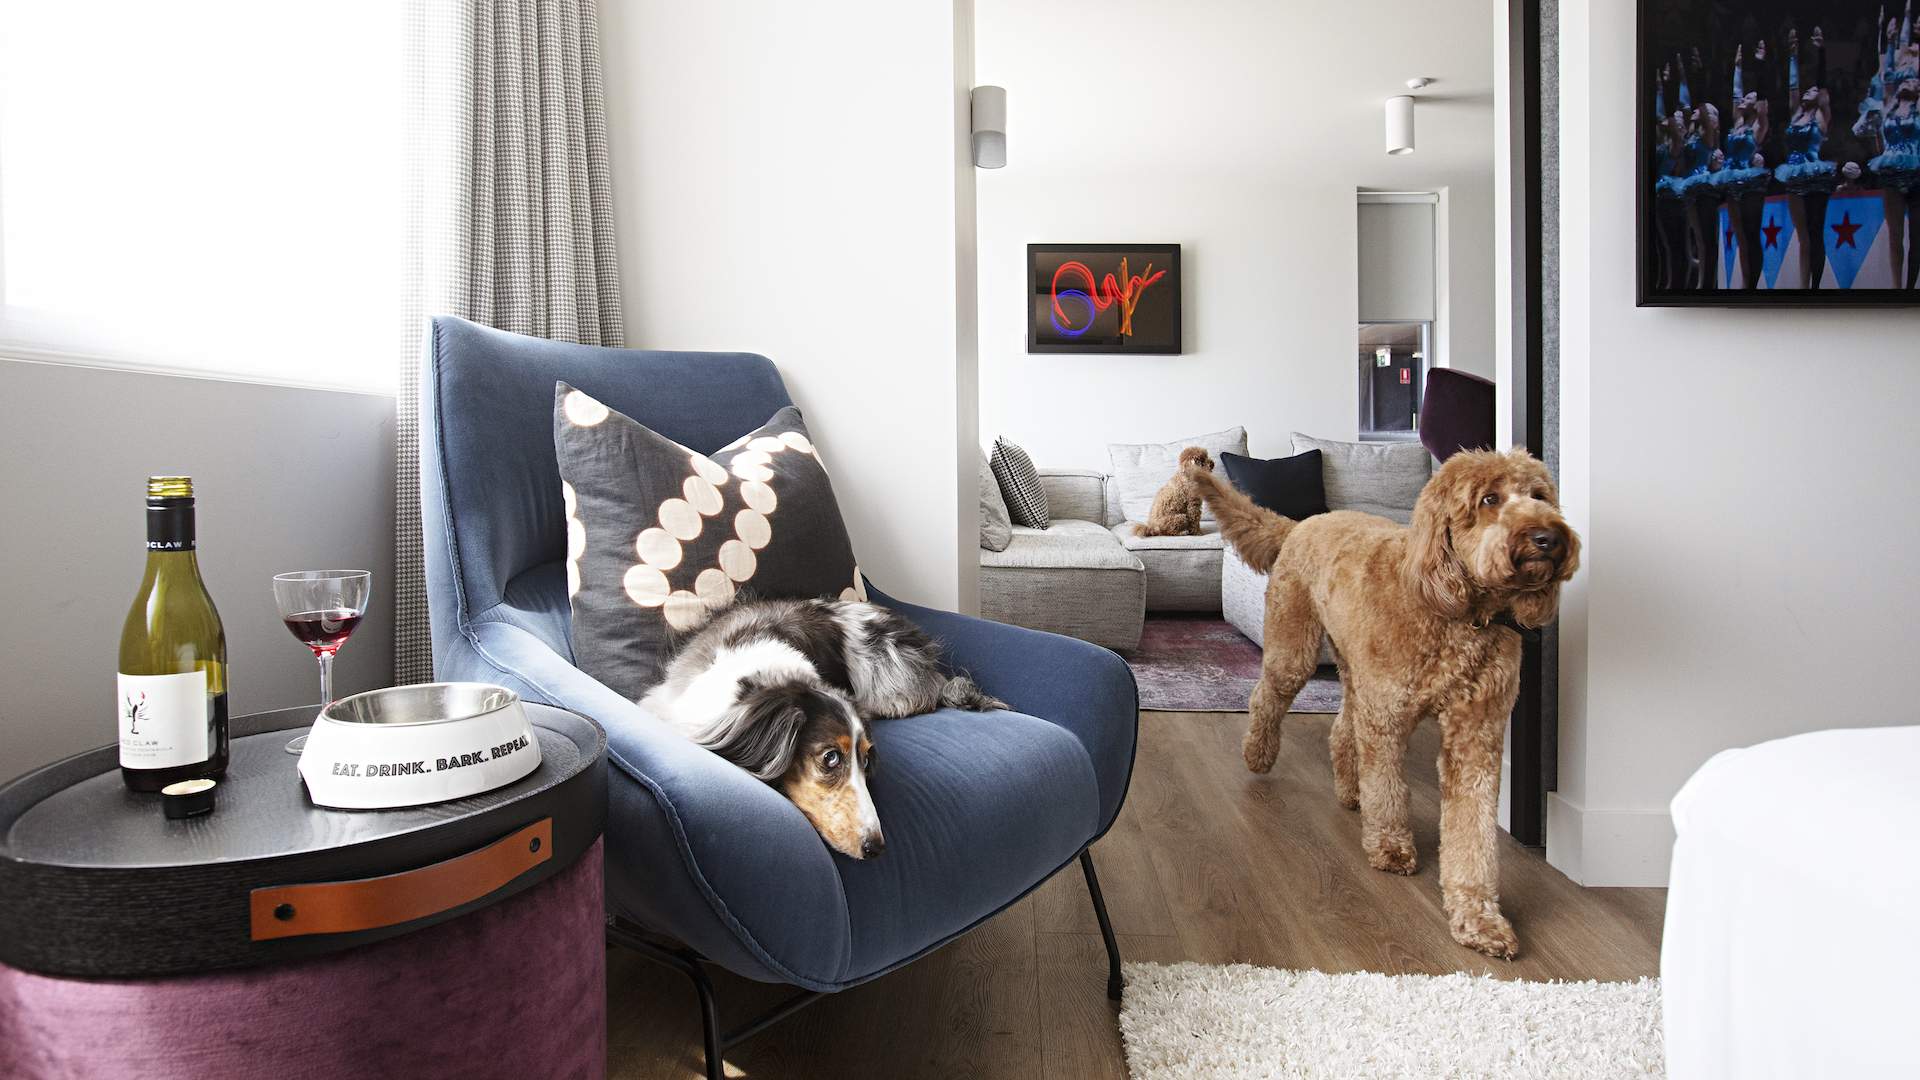 Best dog-friendly hotels Victoria, Melbourne - accommodations - Zagame's House